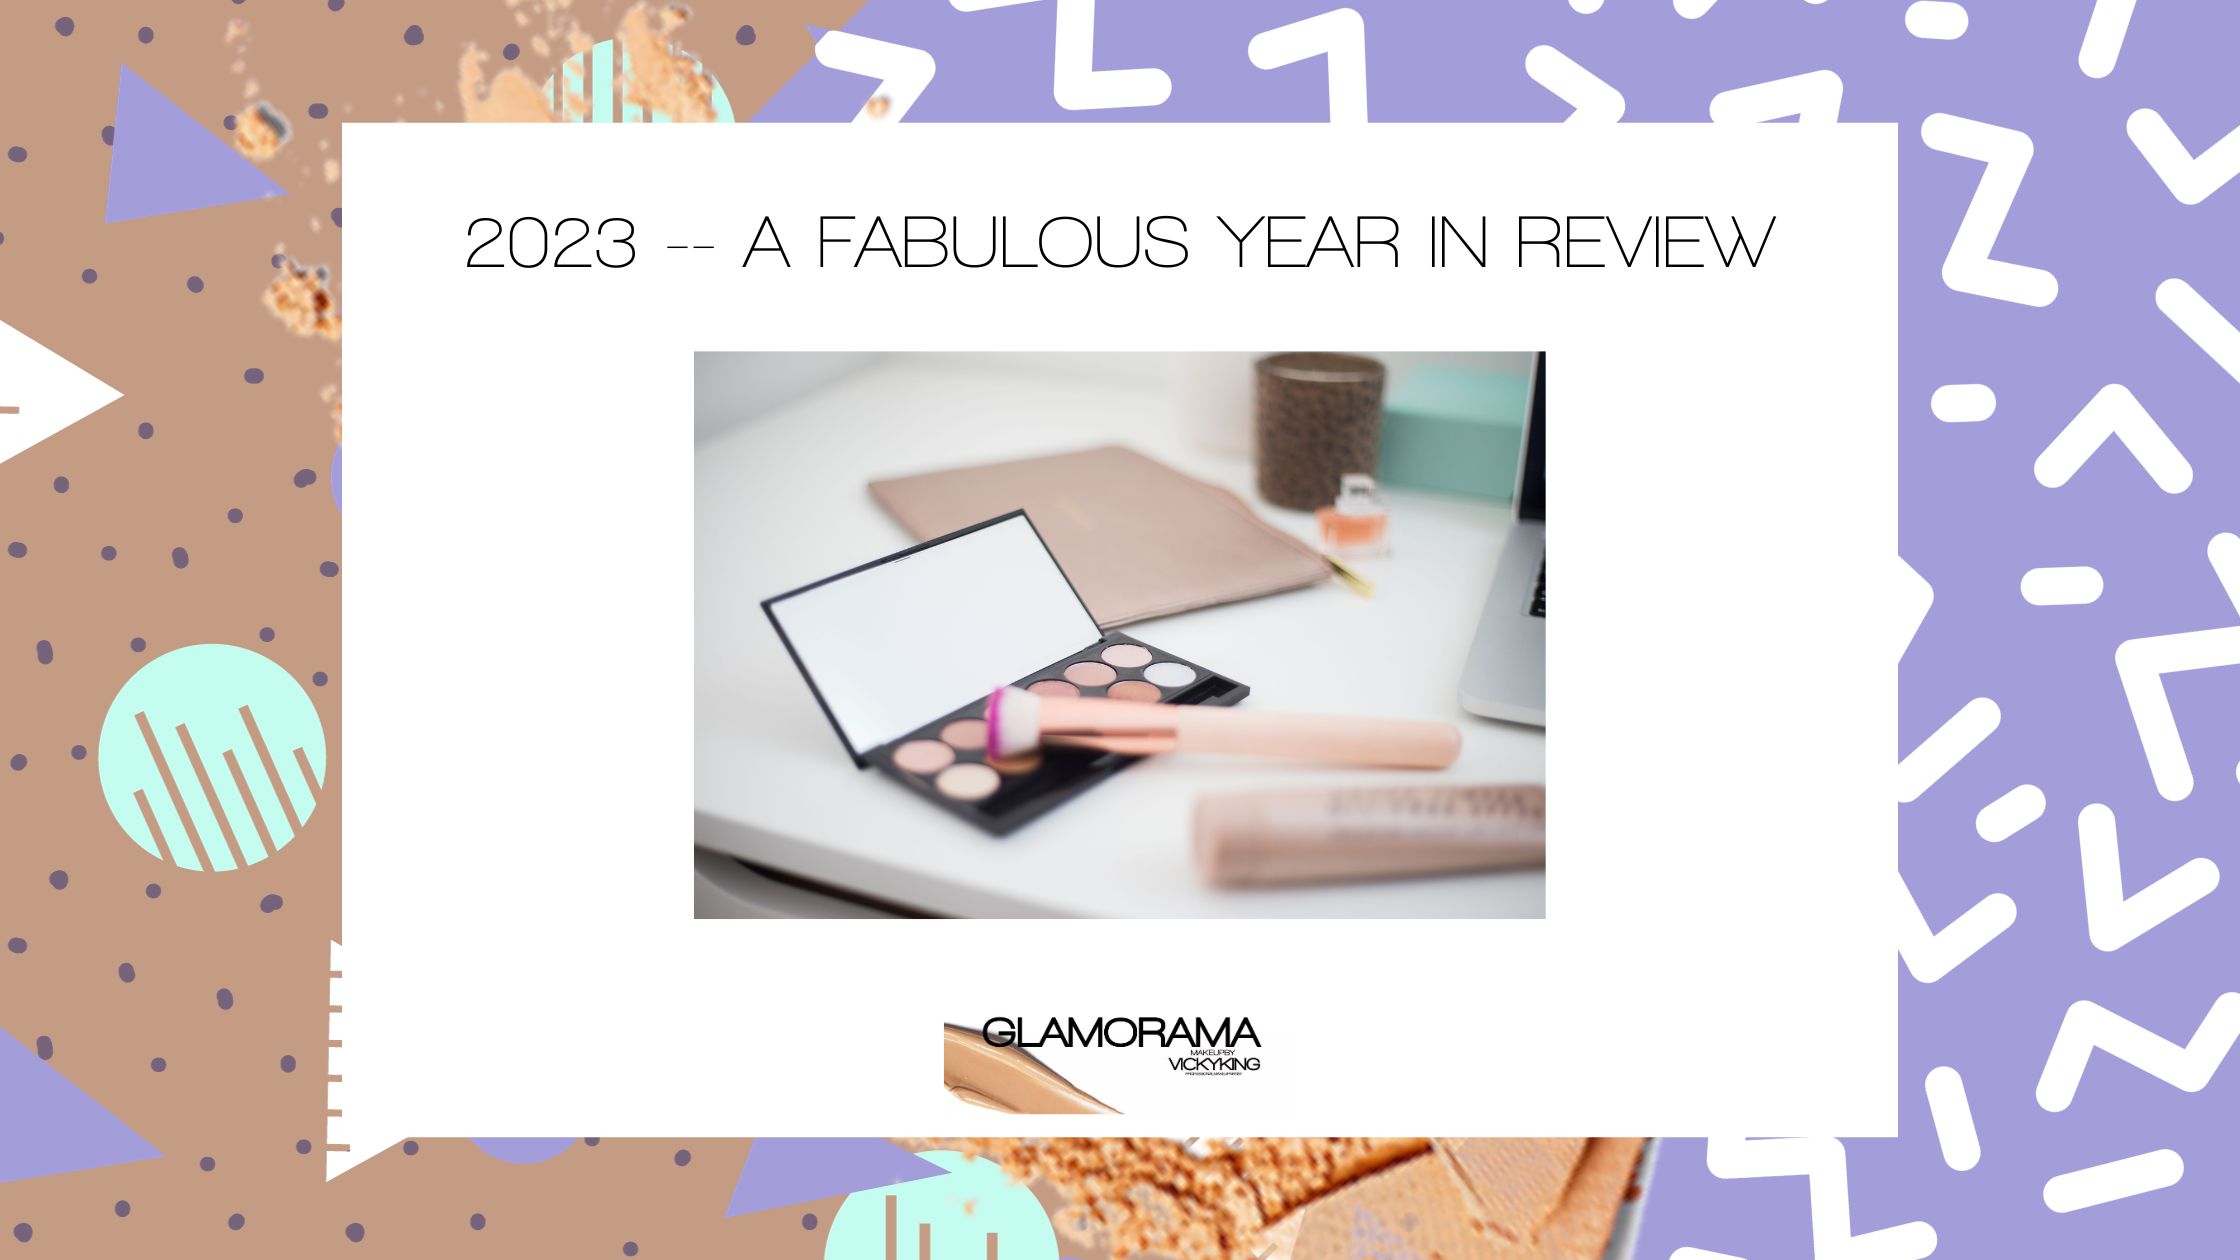 2023 -- a Fabulous Year in Review